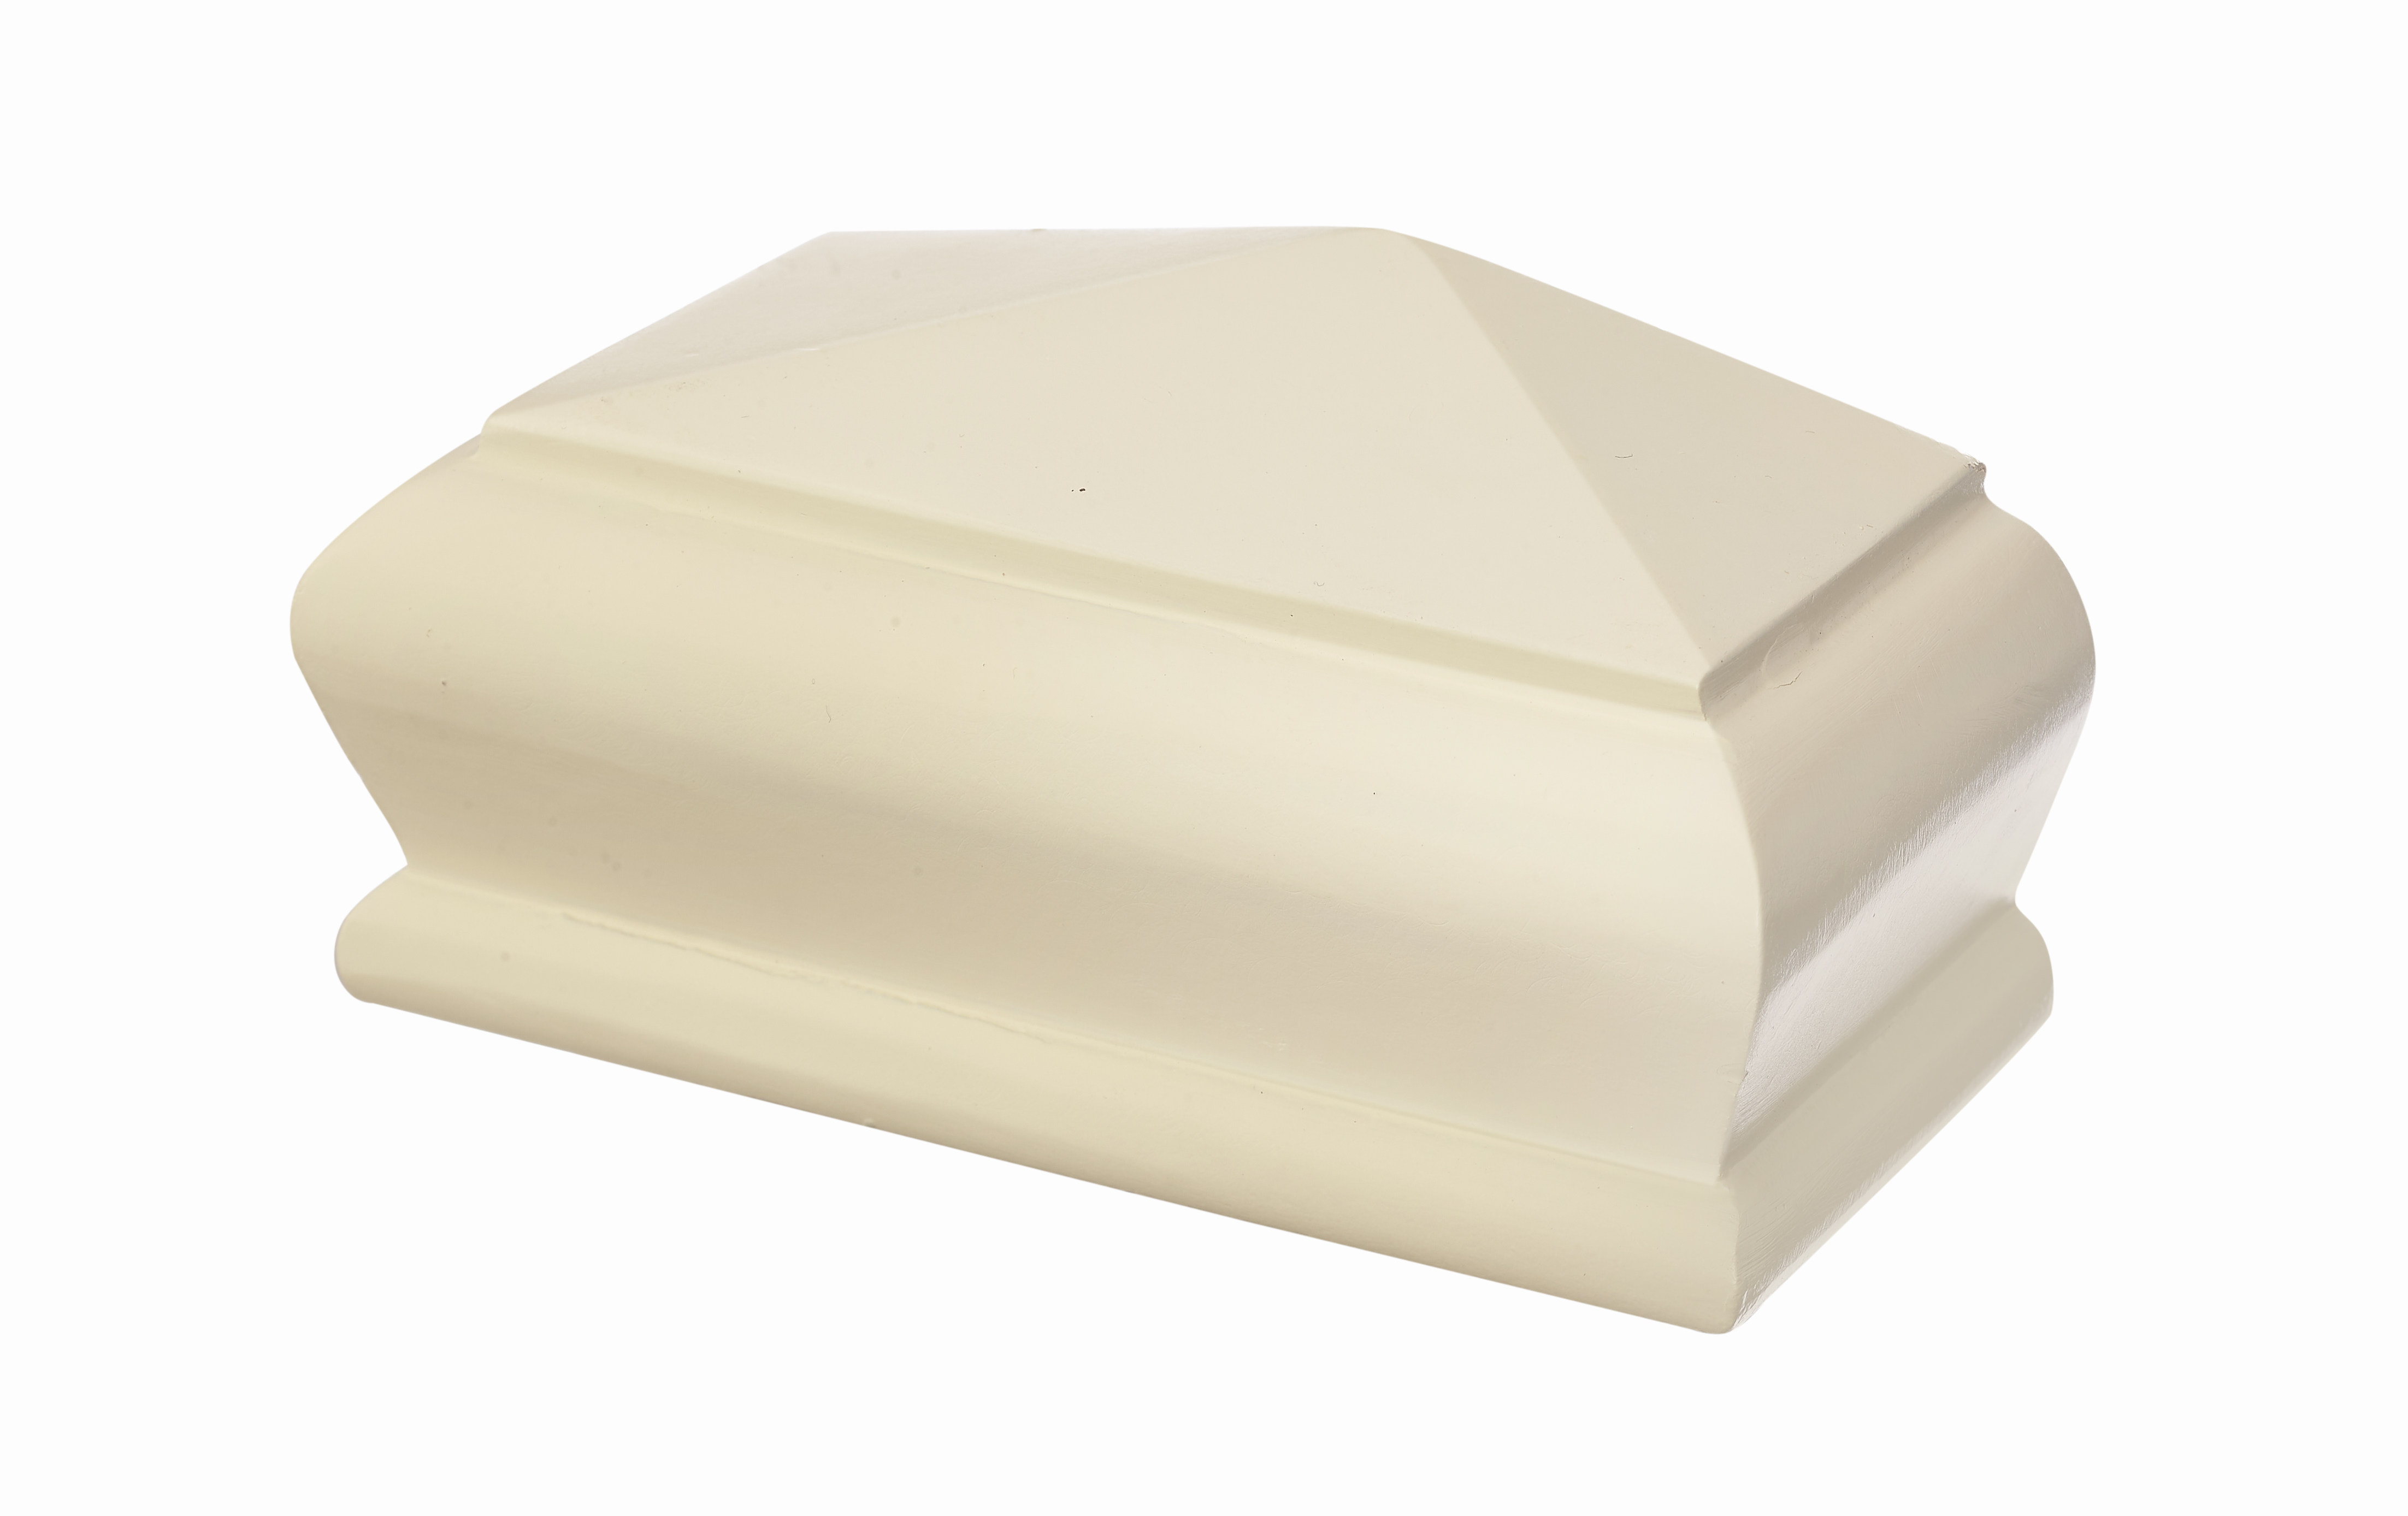 1 Smooth Primed Pyramid Half Cap for 90mm Newel